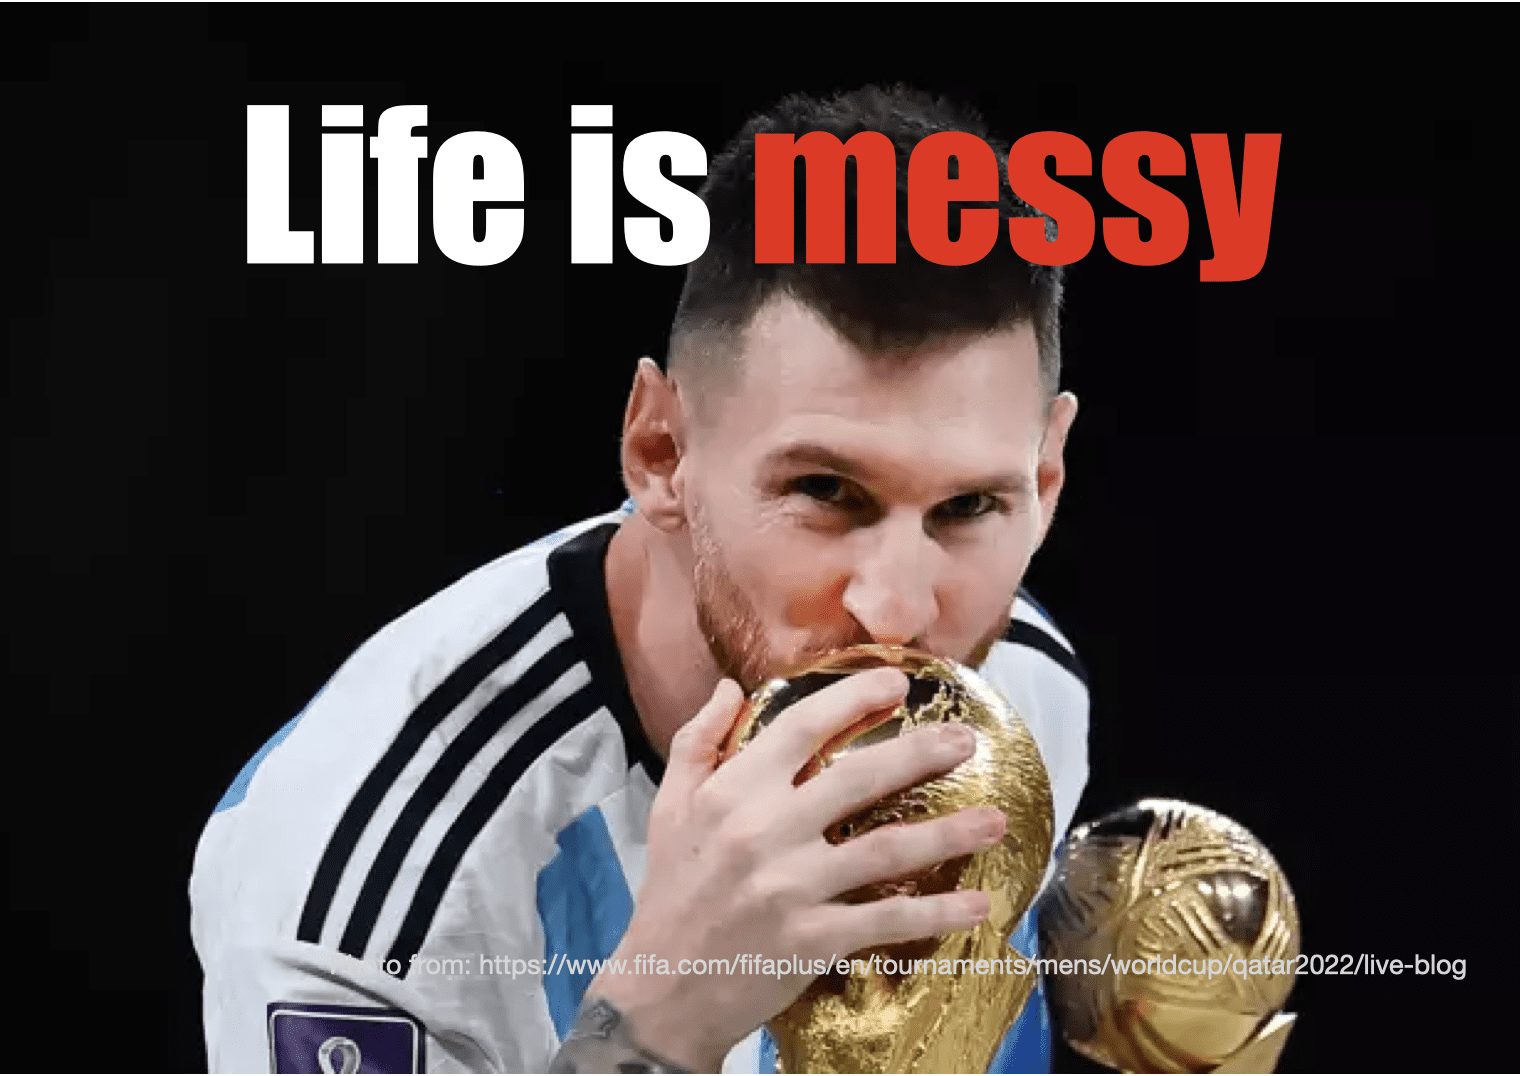 Life is messy. How the World Cup 2022 was a perfect reminder of the messi-ness of our existence.